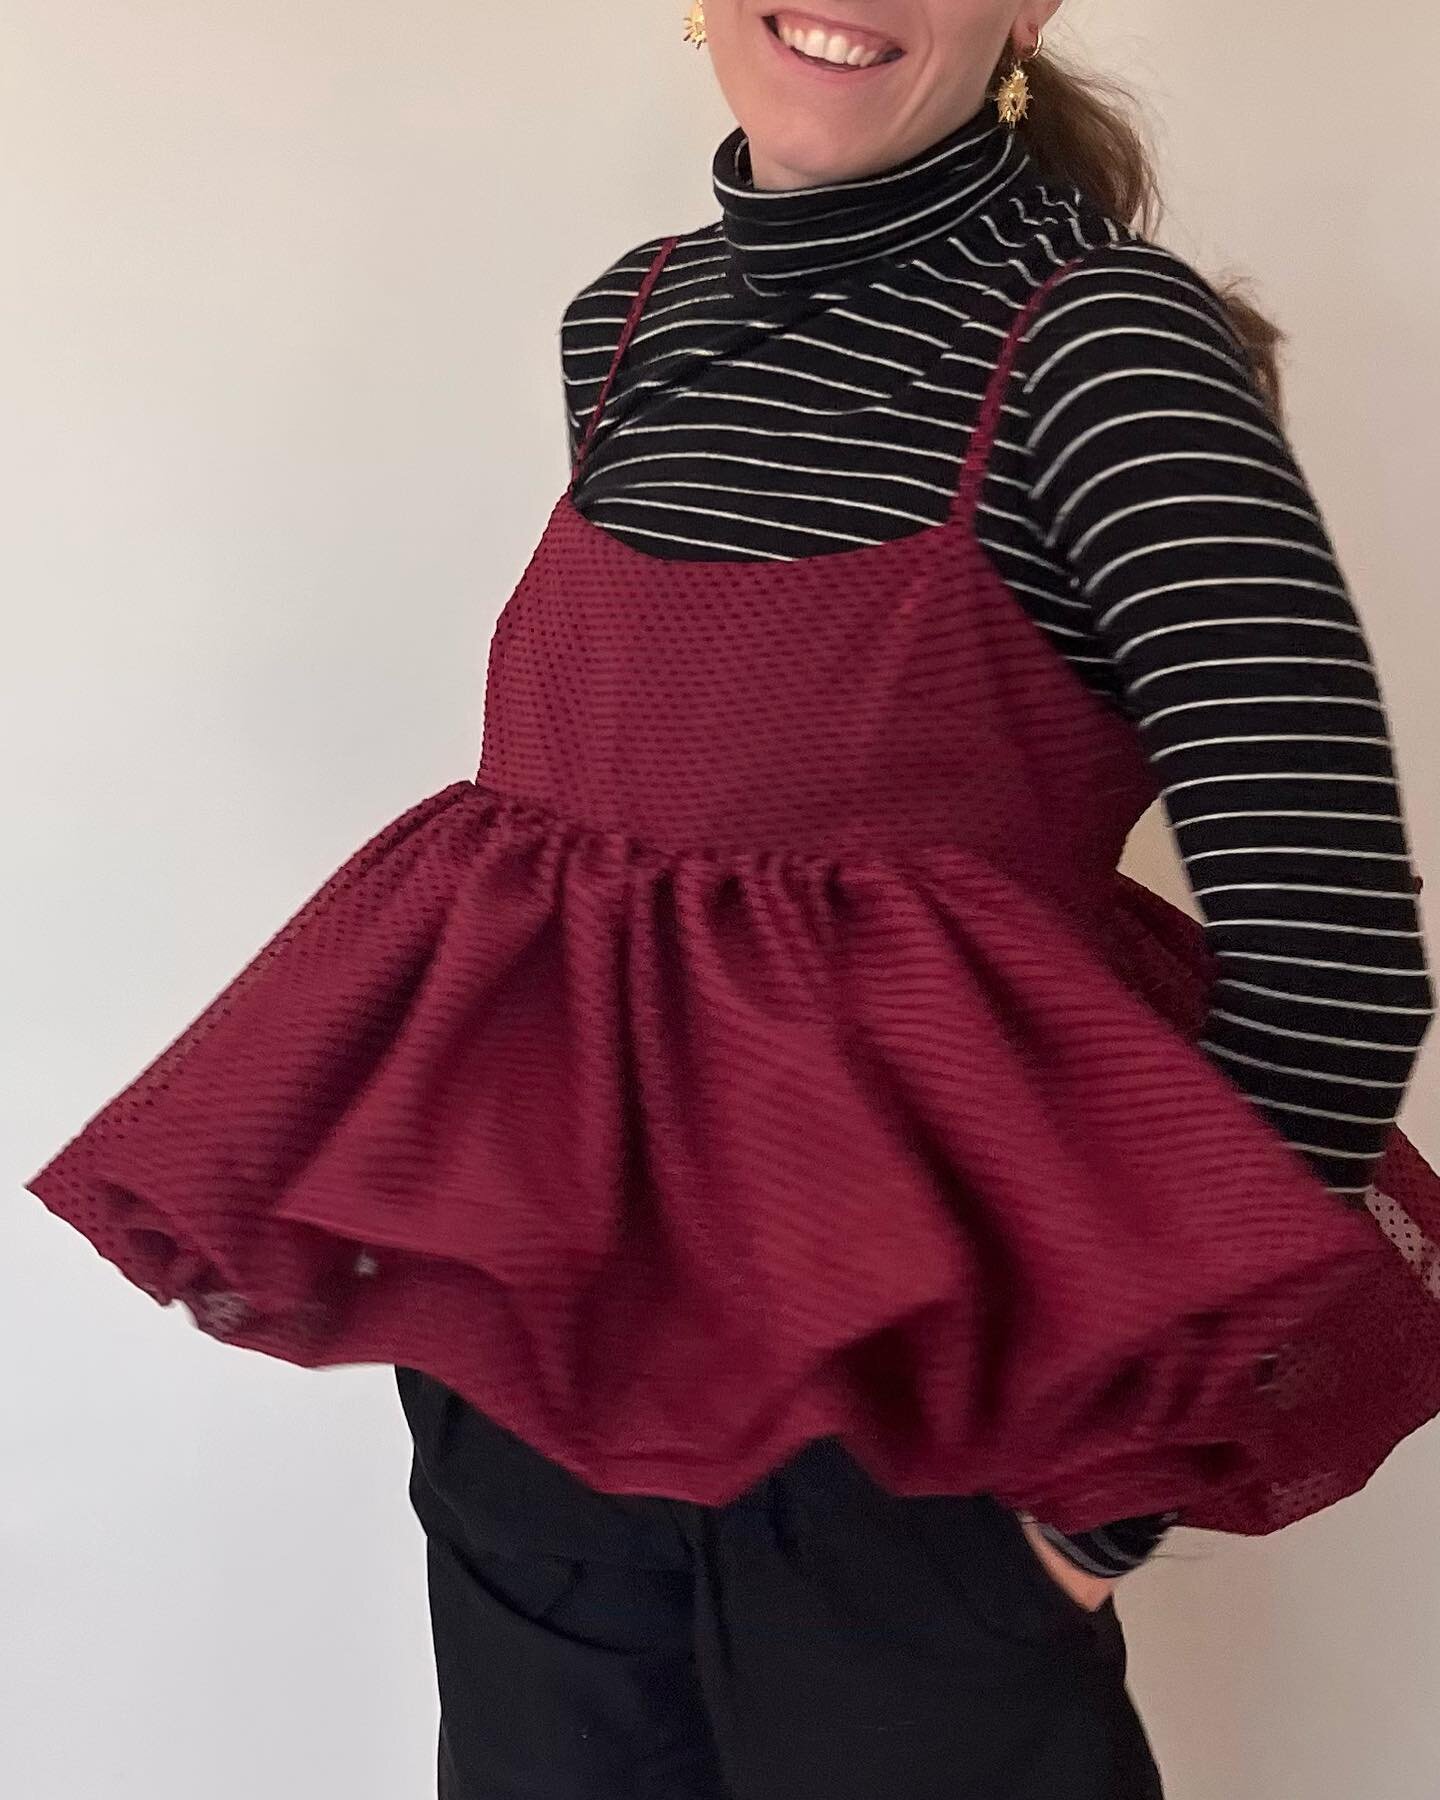 Holiday Moody tank 🎁🤍🥰

Another one-of-a-kind made from secondhand fabric that&rsquo;s sparkly, sheer, and ruby red with black velvet polka dots 🫶

This one&rsquo;s fully lined - so there are two layers of gathered fabric giving it lots of volume